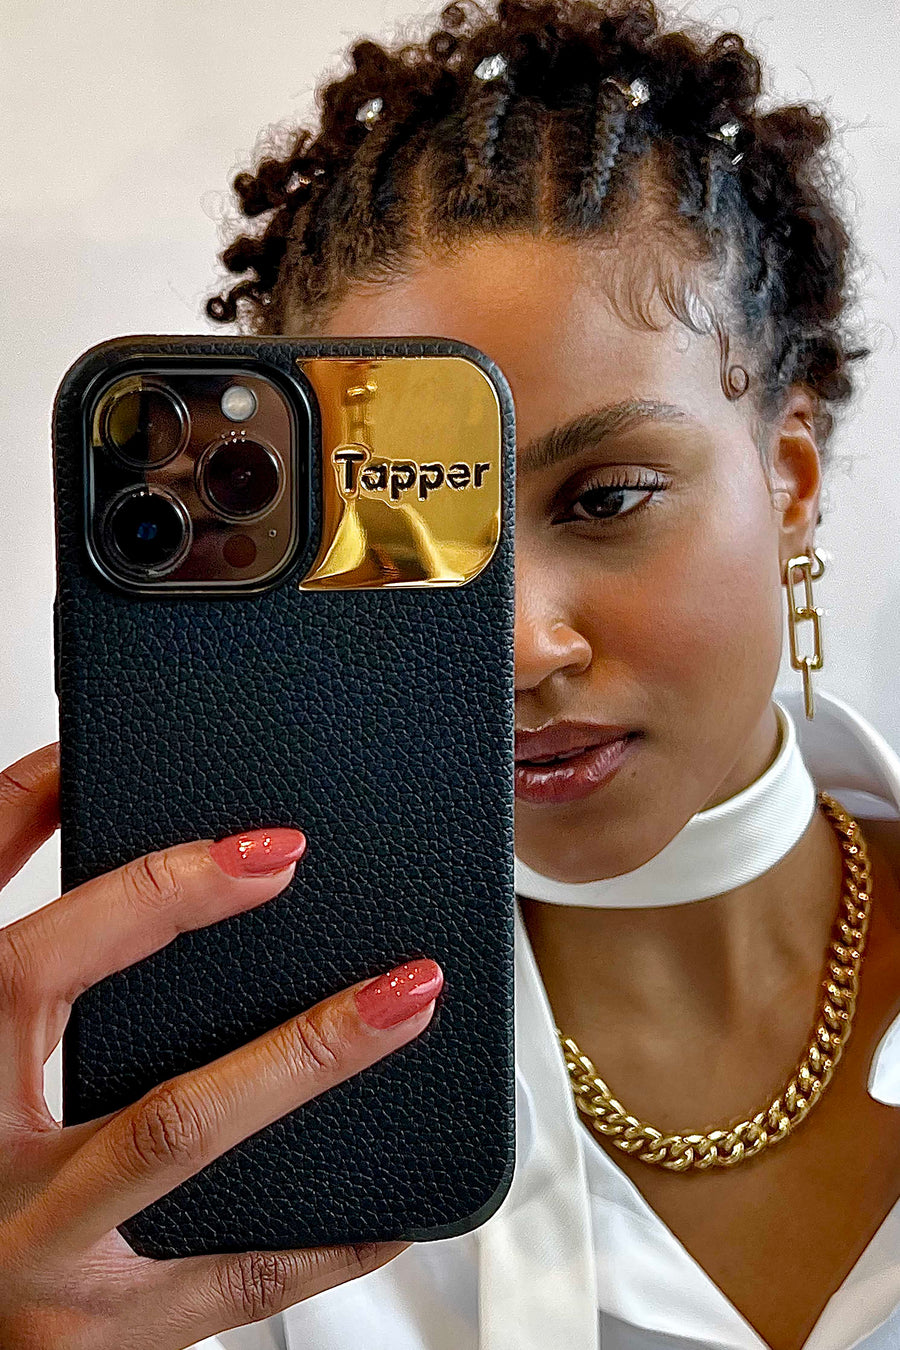 Tapper's luxurious black genuine cow leather iPhone 13 Pro case with MagSafe and a metal logo plate in 18k gold plating that protects and elevates the look of your iPhone 13 Pro. The next must-have high end protective Apple iPhone accessory in real leather and precious metals.  Designed in Sweden by Tapper. Free Express Shipping at gettapper.com